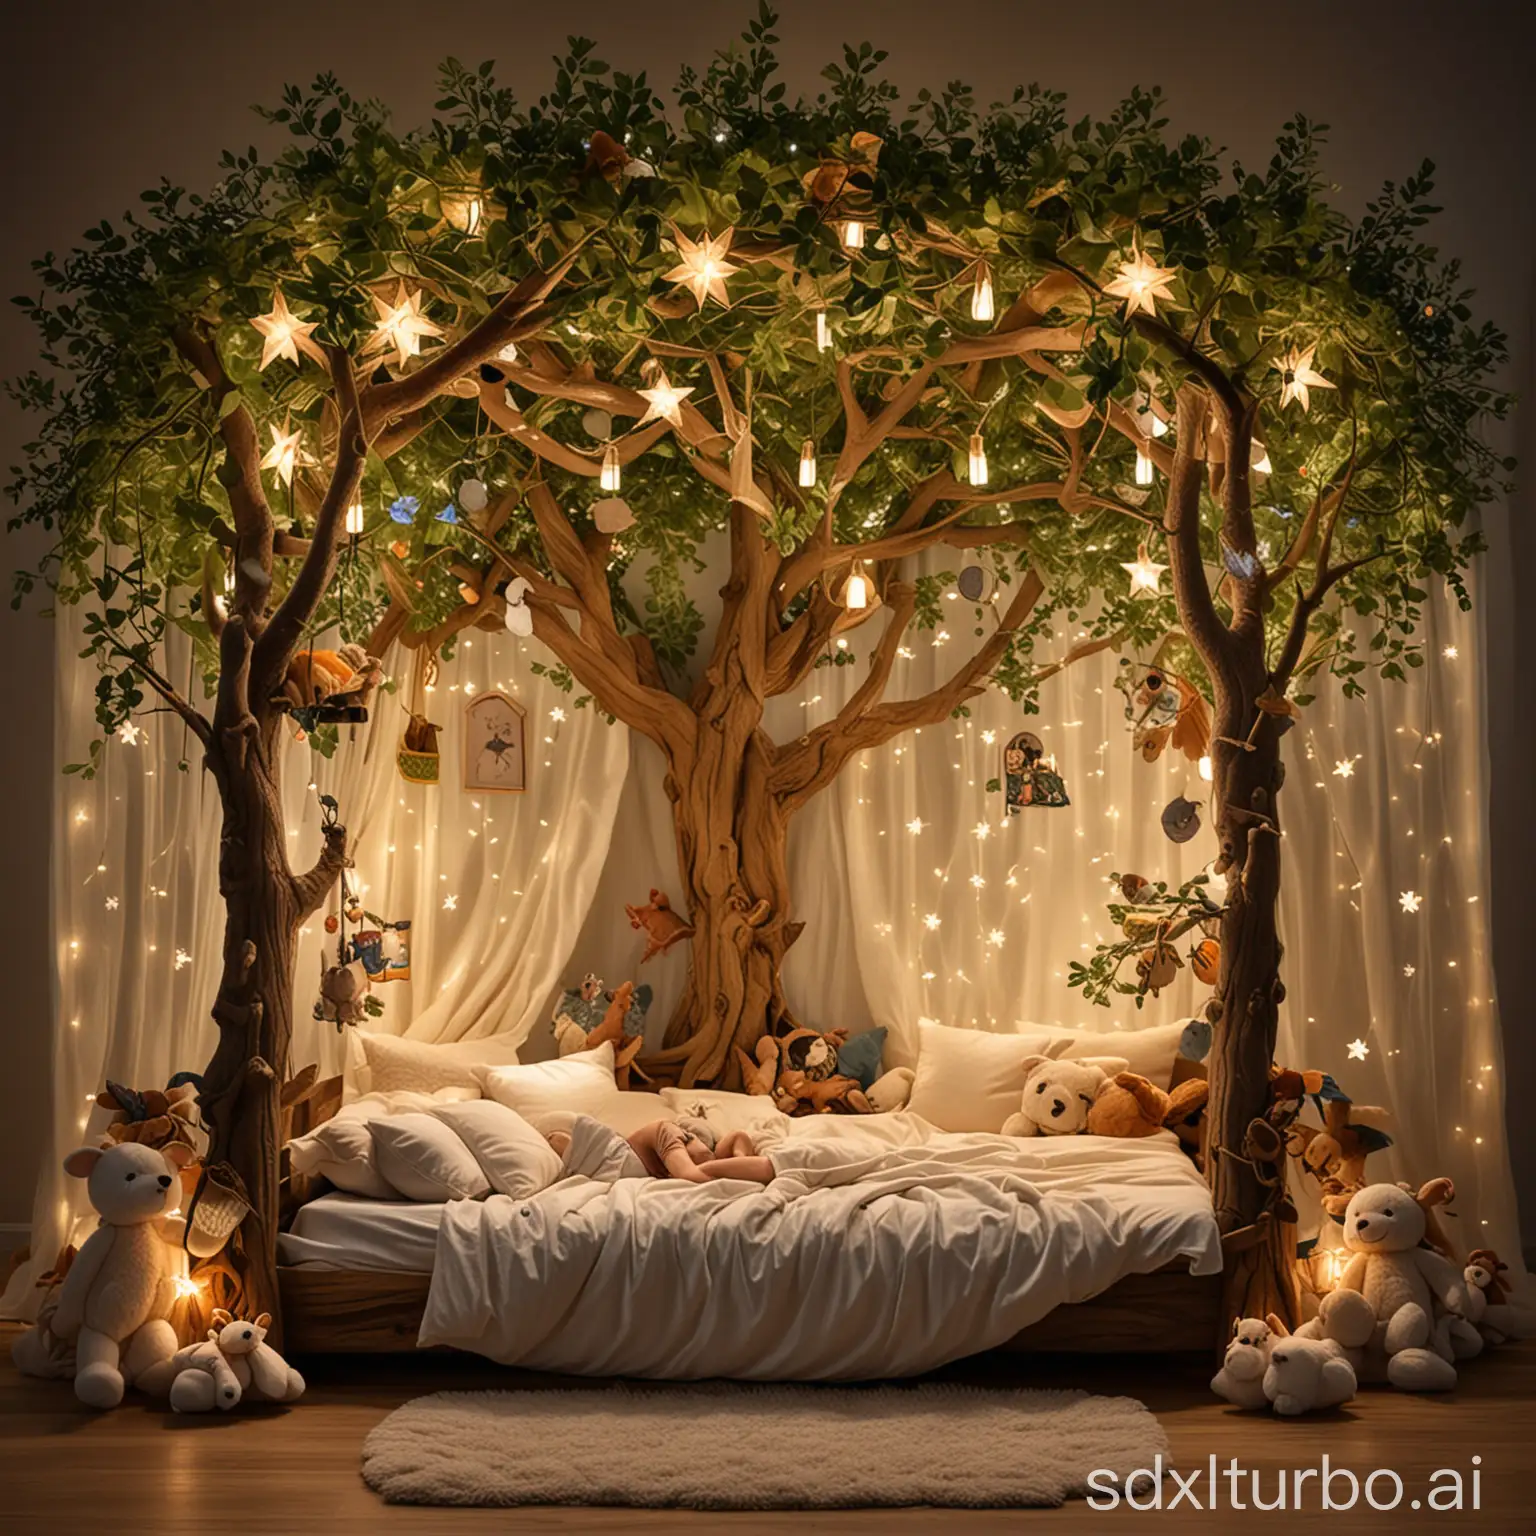 Dreamy-Treehouse-Bed-with-Plush-Animals-and-LED-Star-Lights